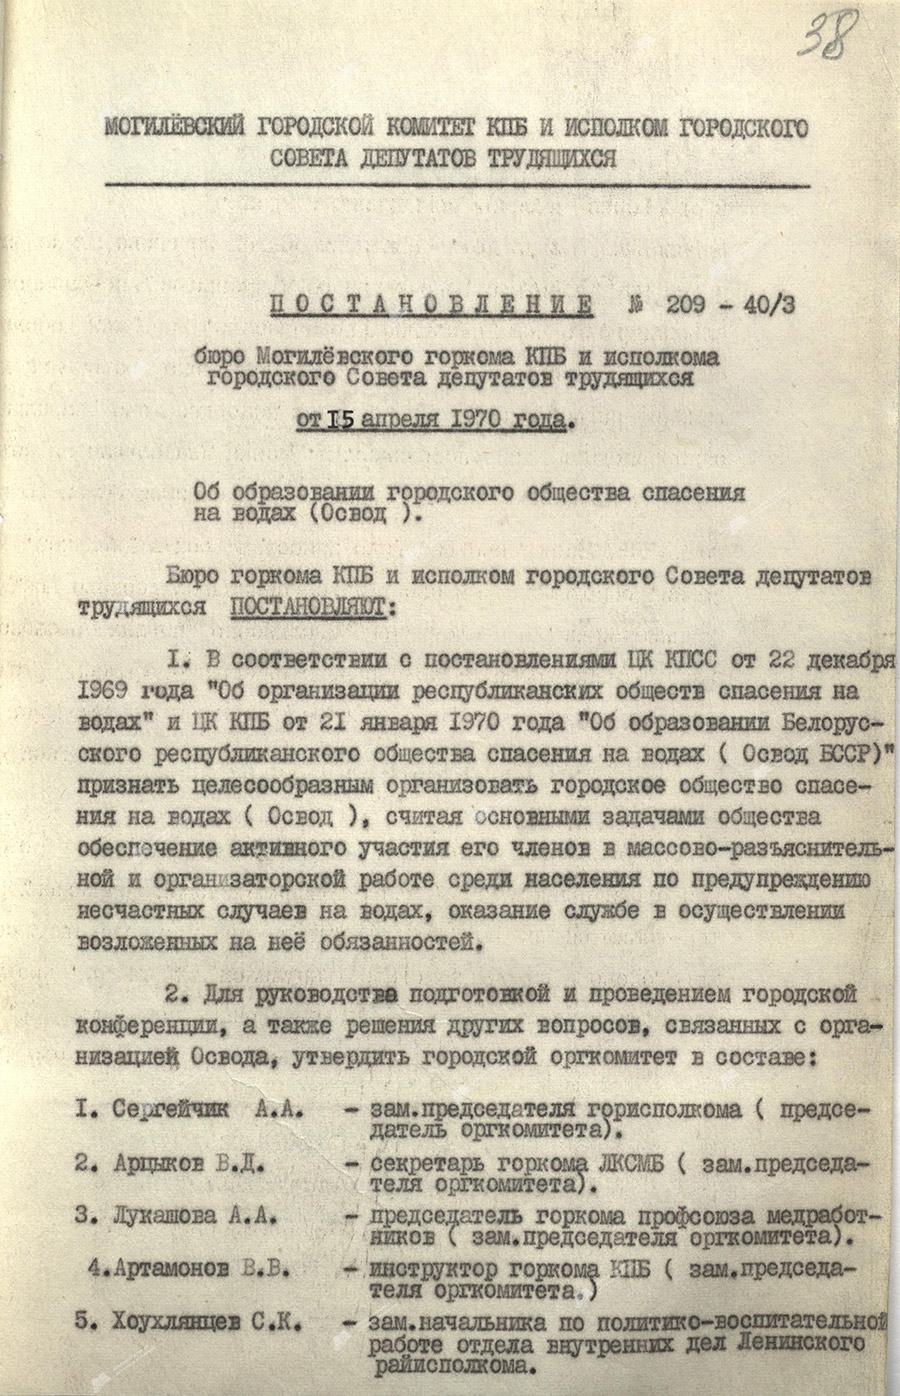 Resolution No. 209-40/3 of the Bureau of the City Committee of the Communist Party (Bolsheviks) of Belarus and the Executive Committee of the Mogilev City Council of Workers' Deputies on the organization of the Mogilev City Water Rescue Society-стр. 0